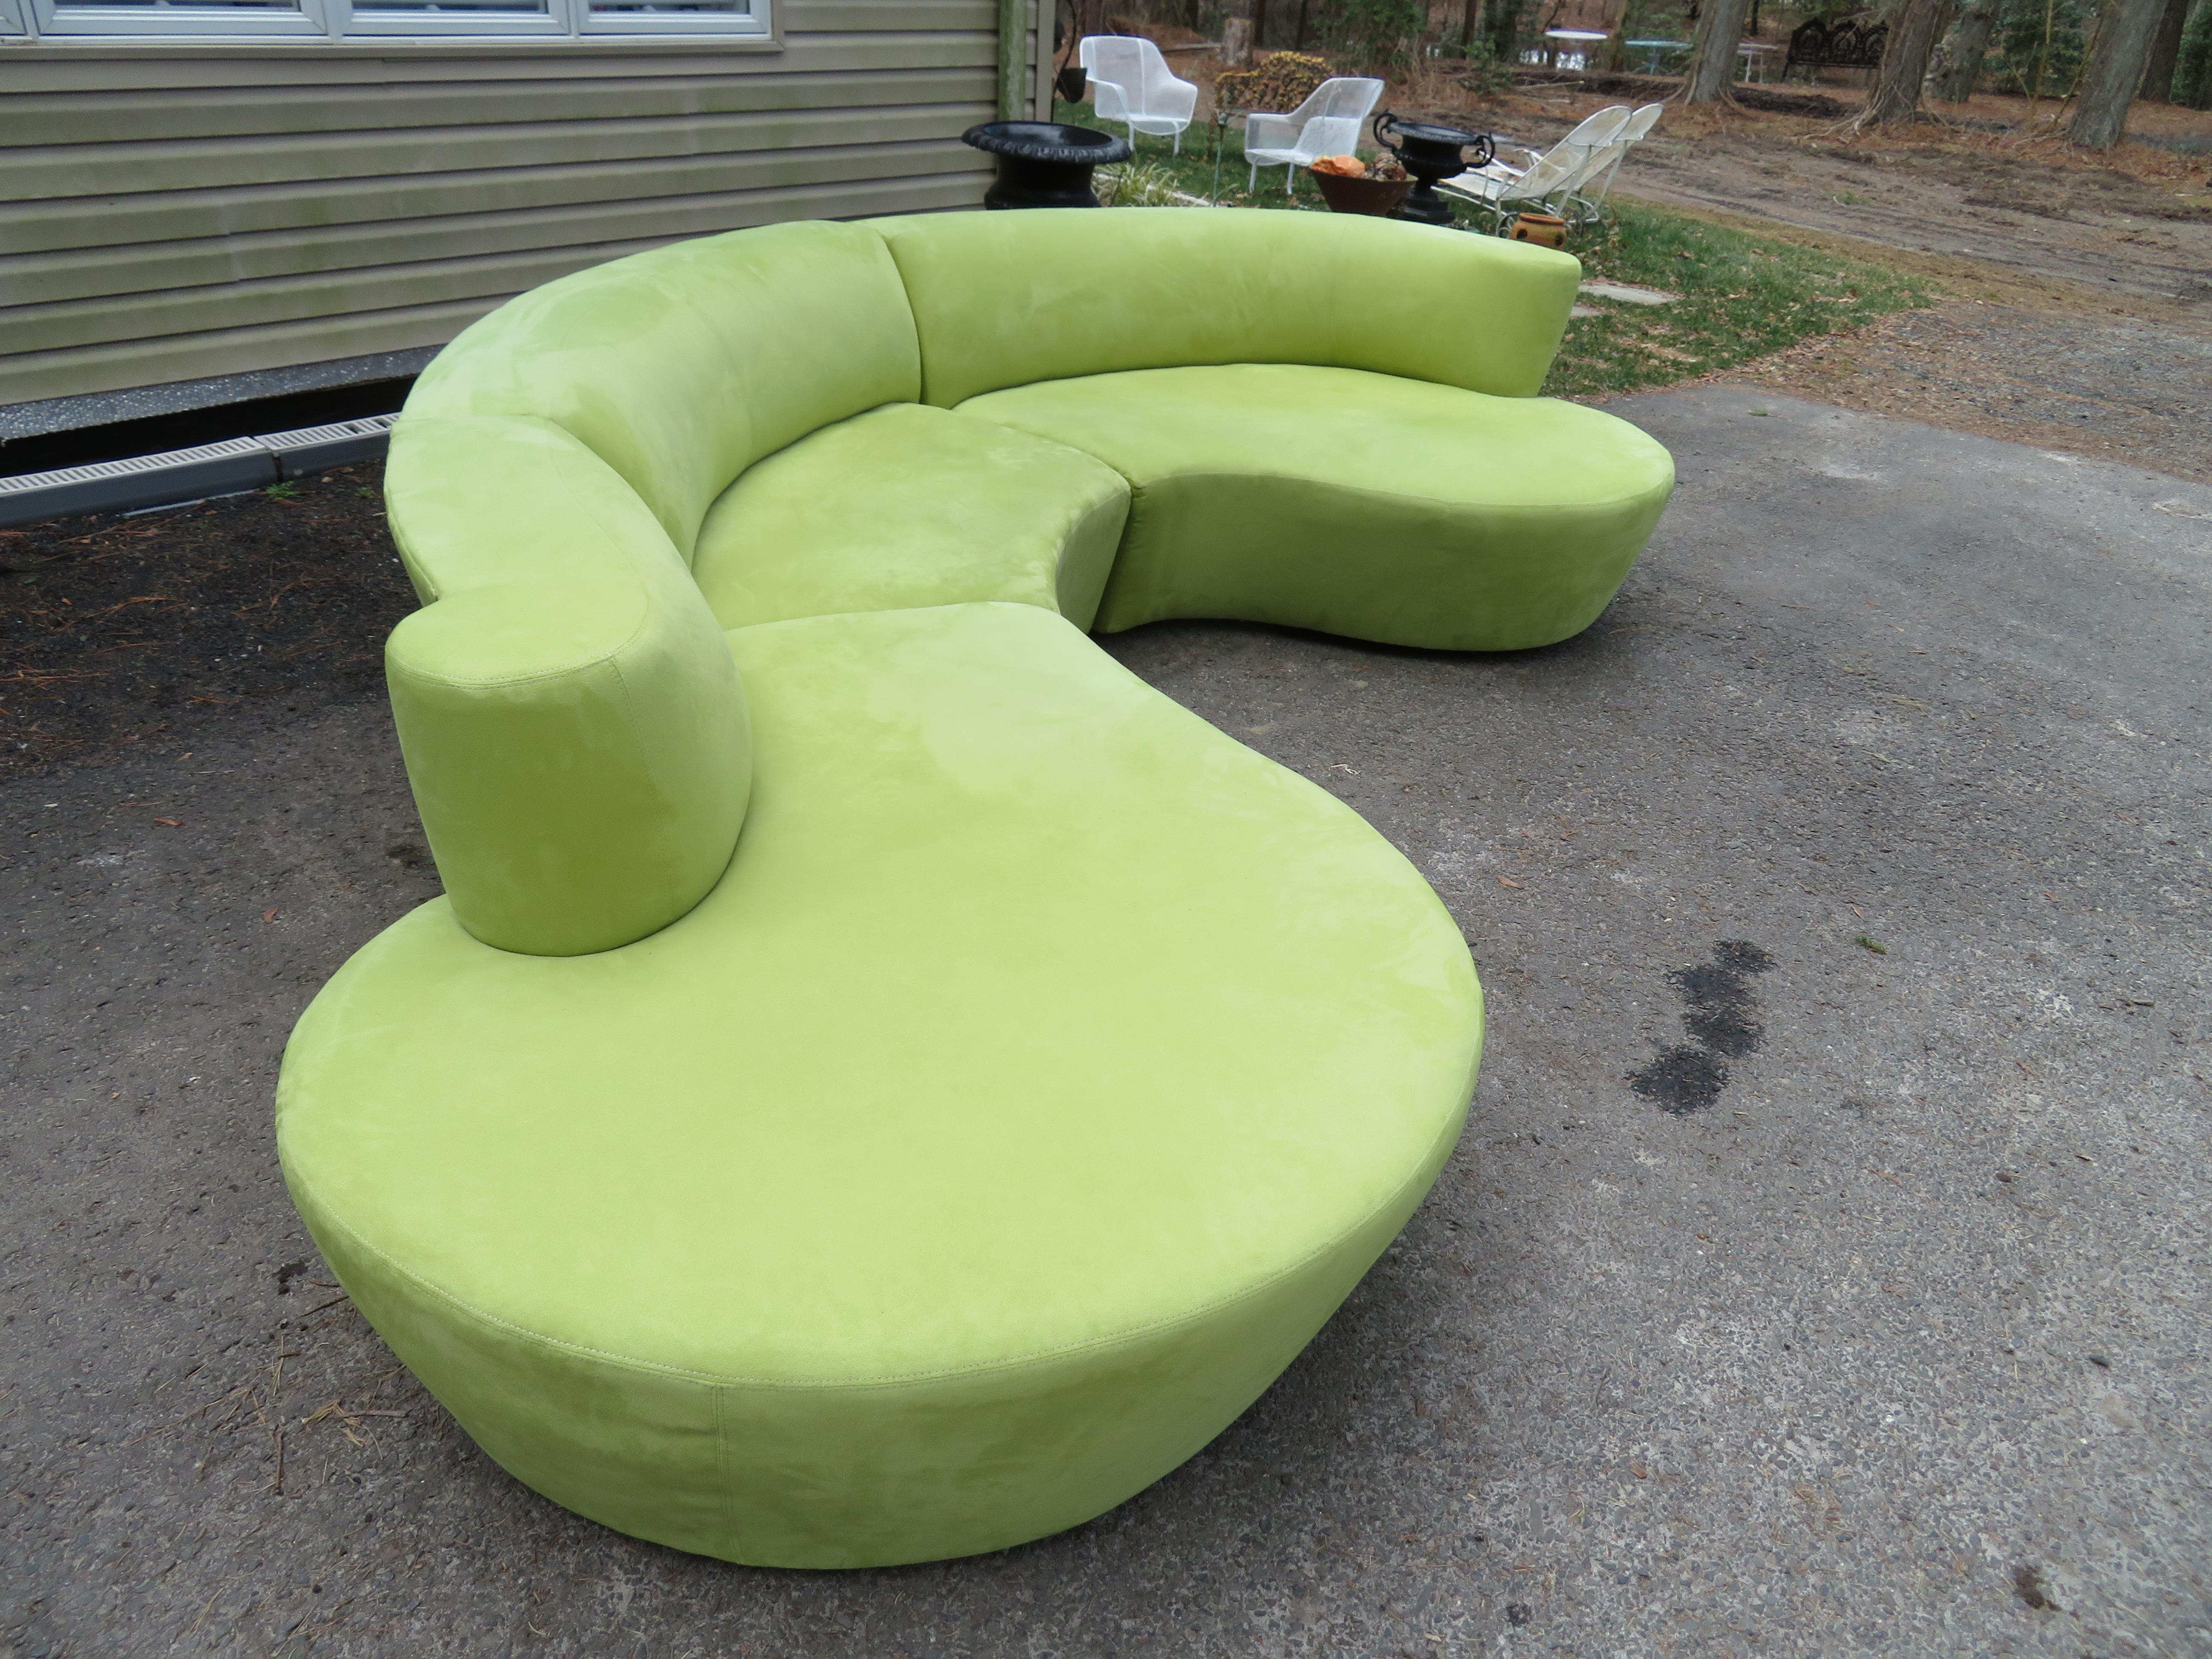 Stunning 3 piece Vladimir Kagan for Weiman curved cloud sofa sectional. This piece is from the late 1990s and still looks fantastic! The lime green ultra-suede fabric is very clean and comfortable-you will love it! This sofa measures as shown 29